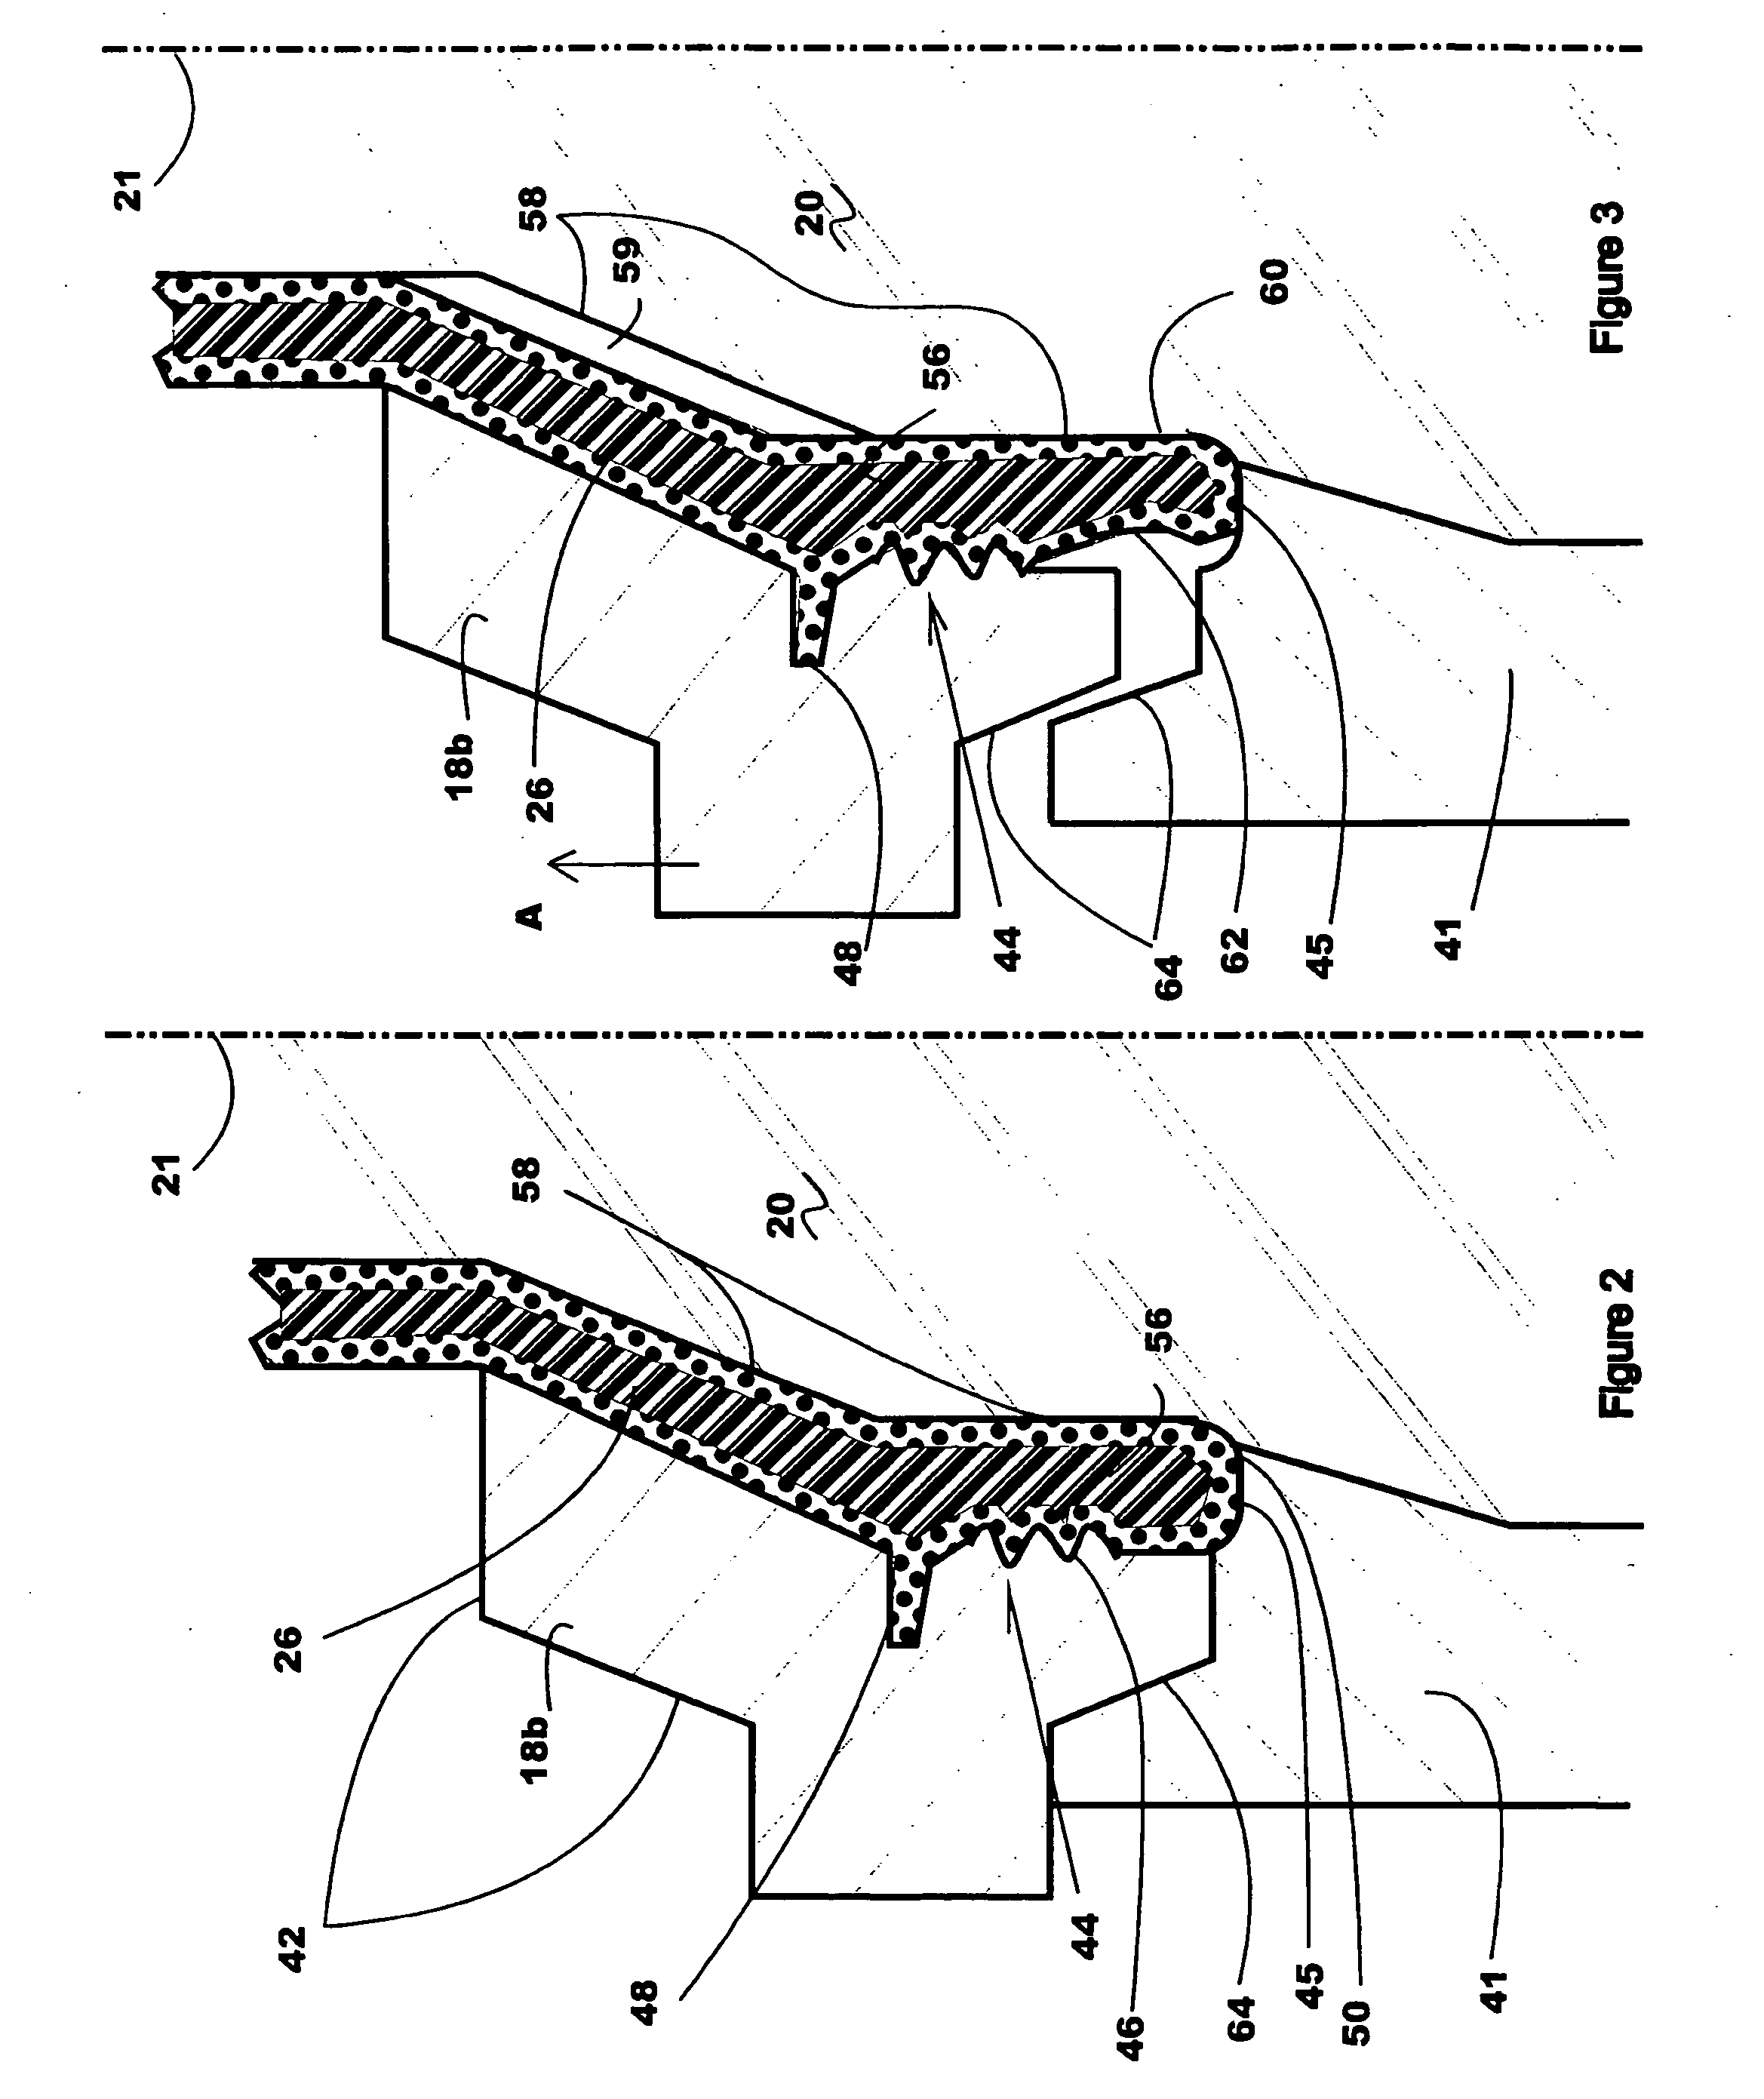 Apparatus and method for two stage ejection of a molded preform from a mold